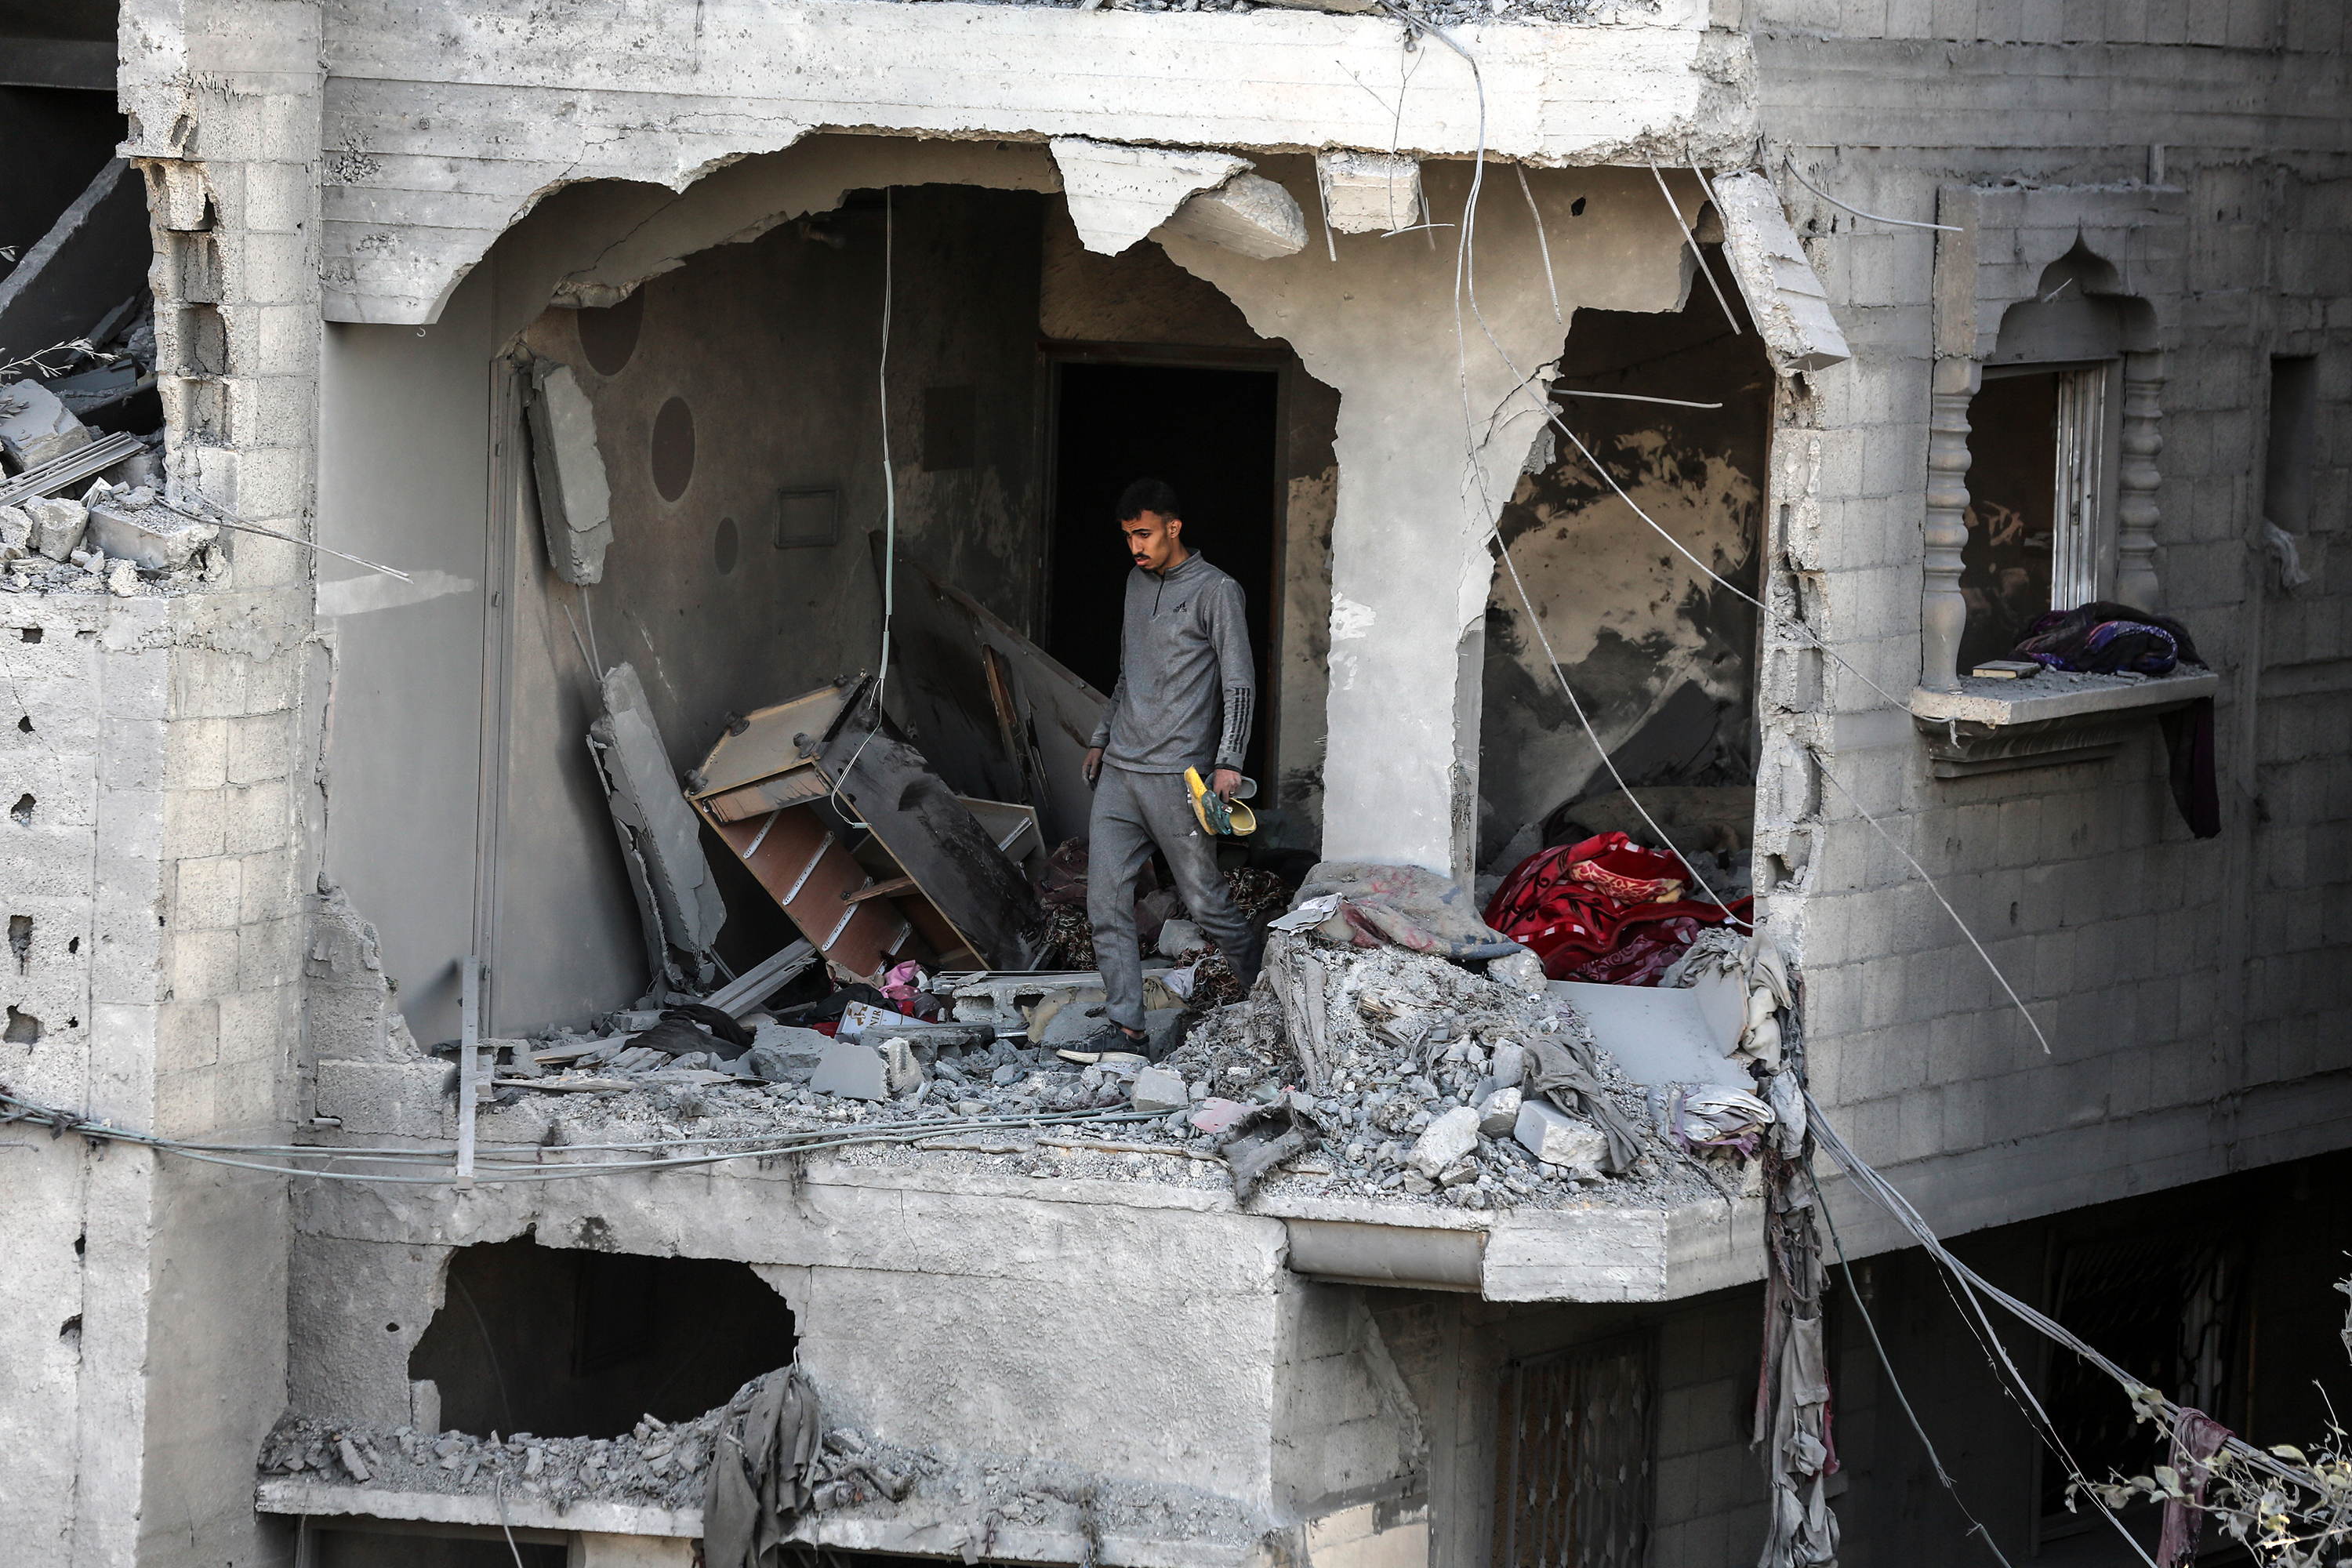 Palestinians inspect the debris of a house destroyed by Israeli shelling in Deir al-Balah, Gaza, on March 4.